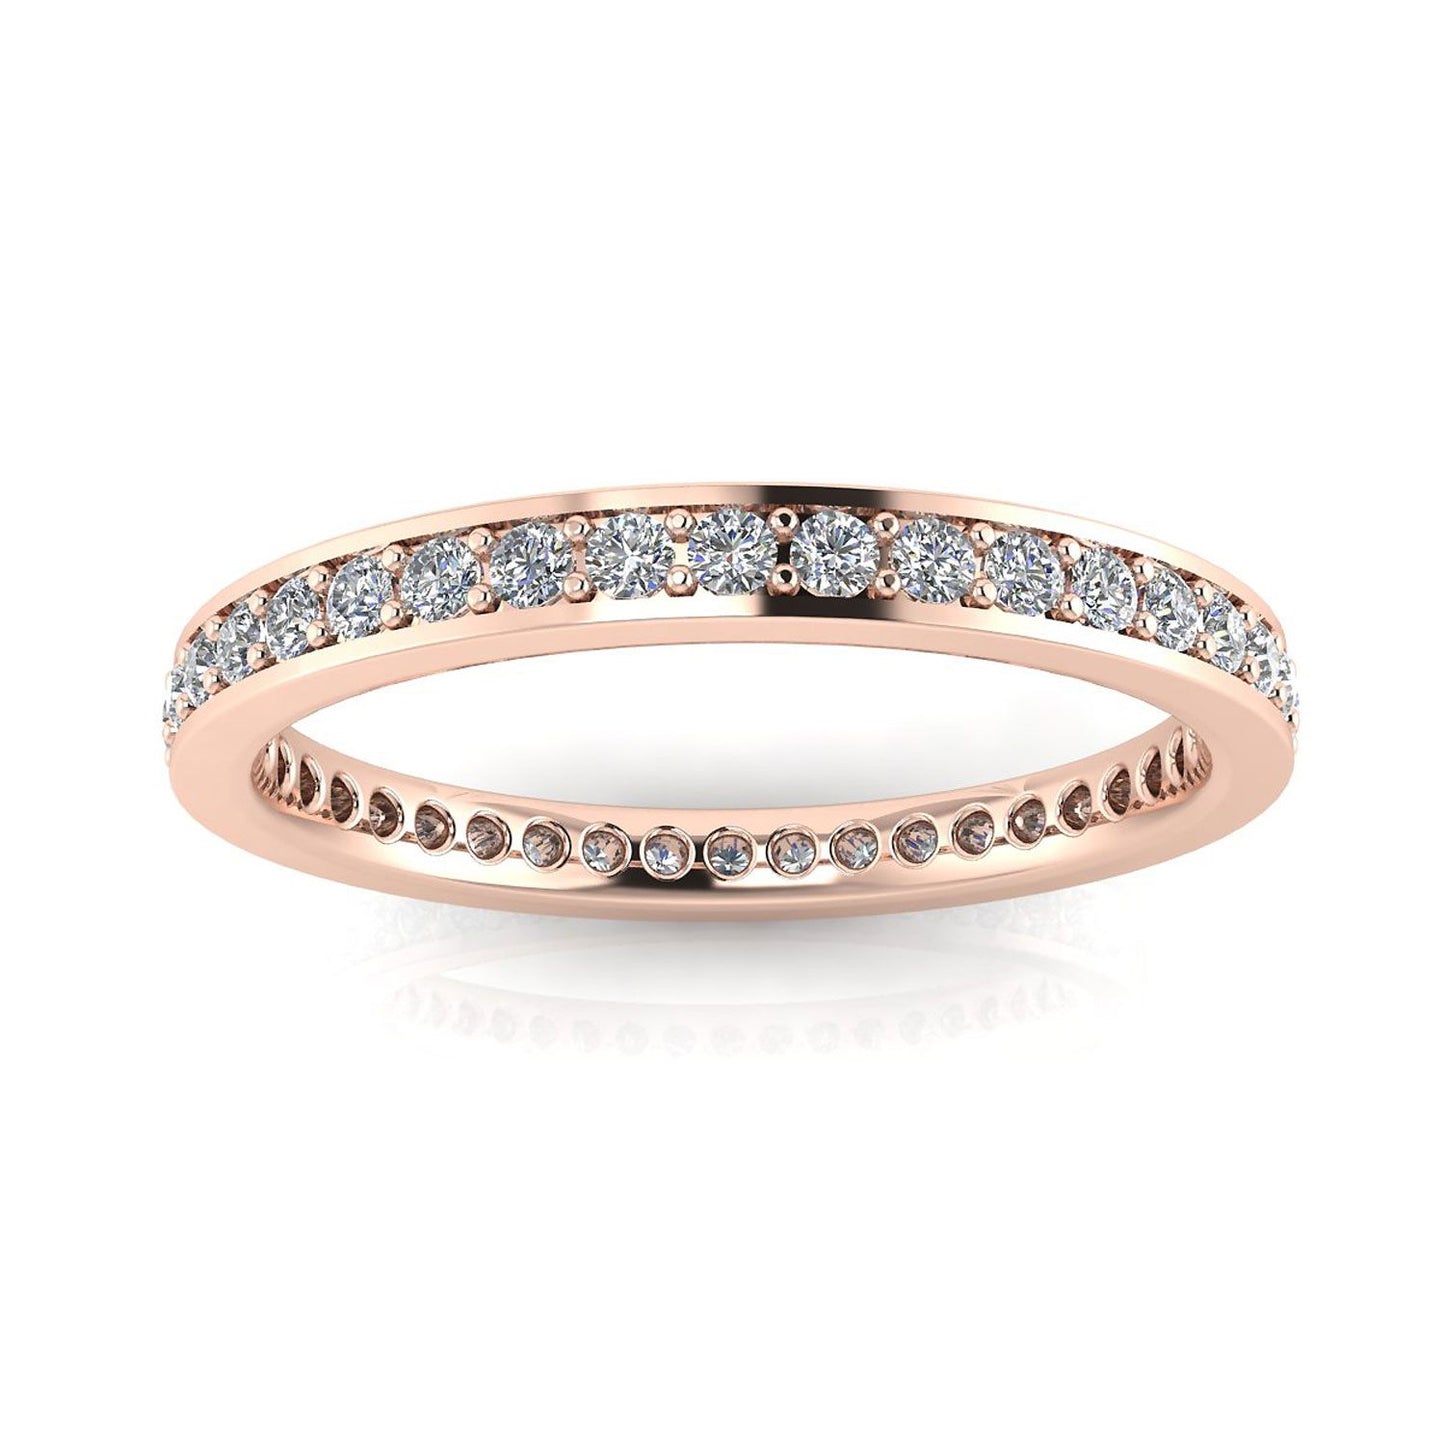 Round Brilliant Cut Diamond Channel Pave Set Eternity Ring In 14k Rose Gold  (0.92ct. Tw.) Ring Size 6